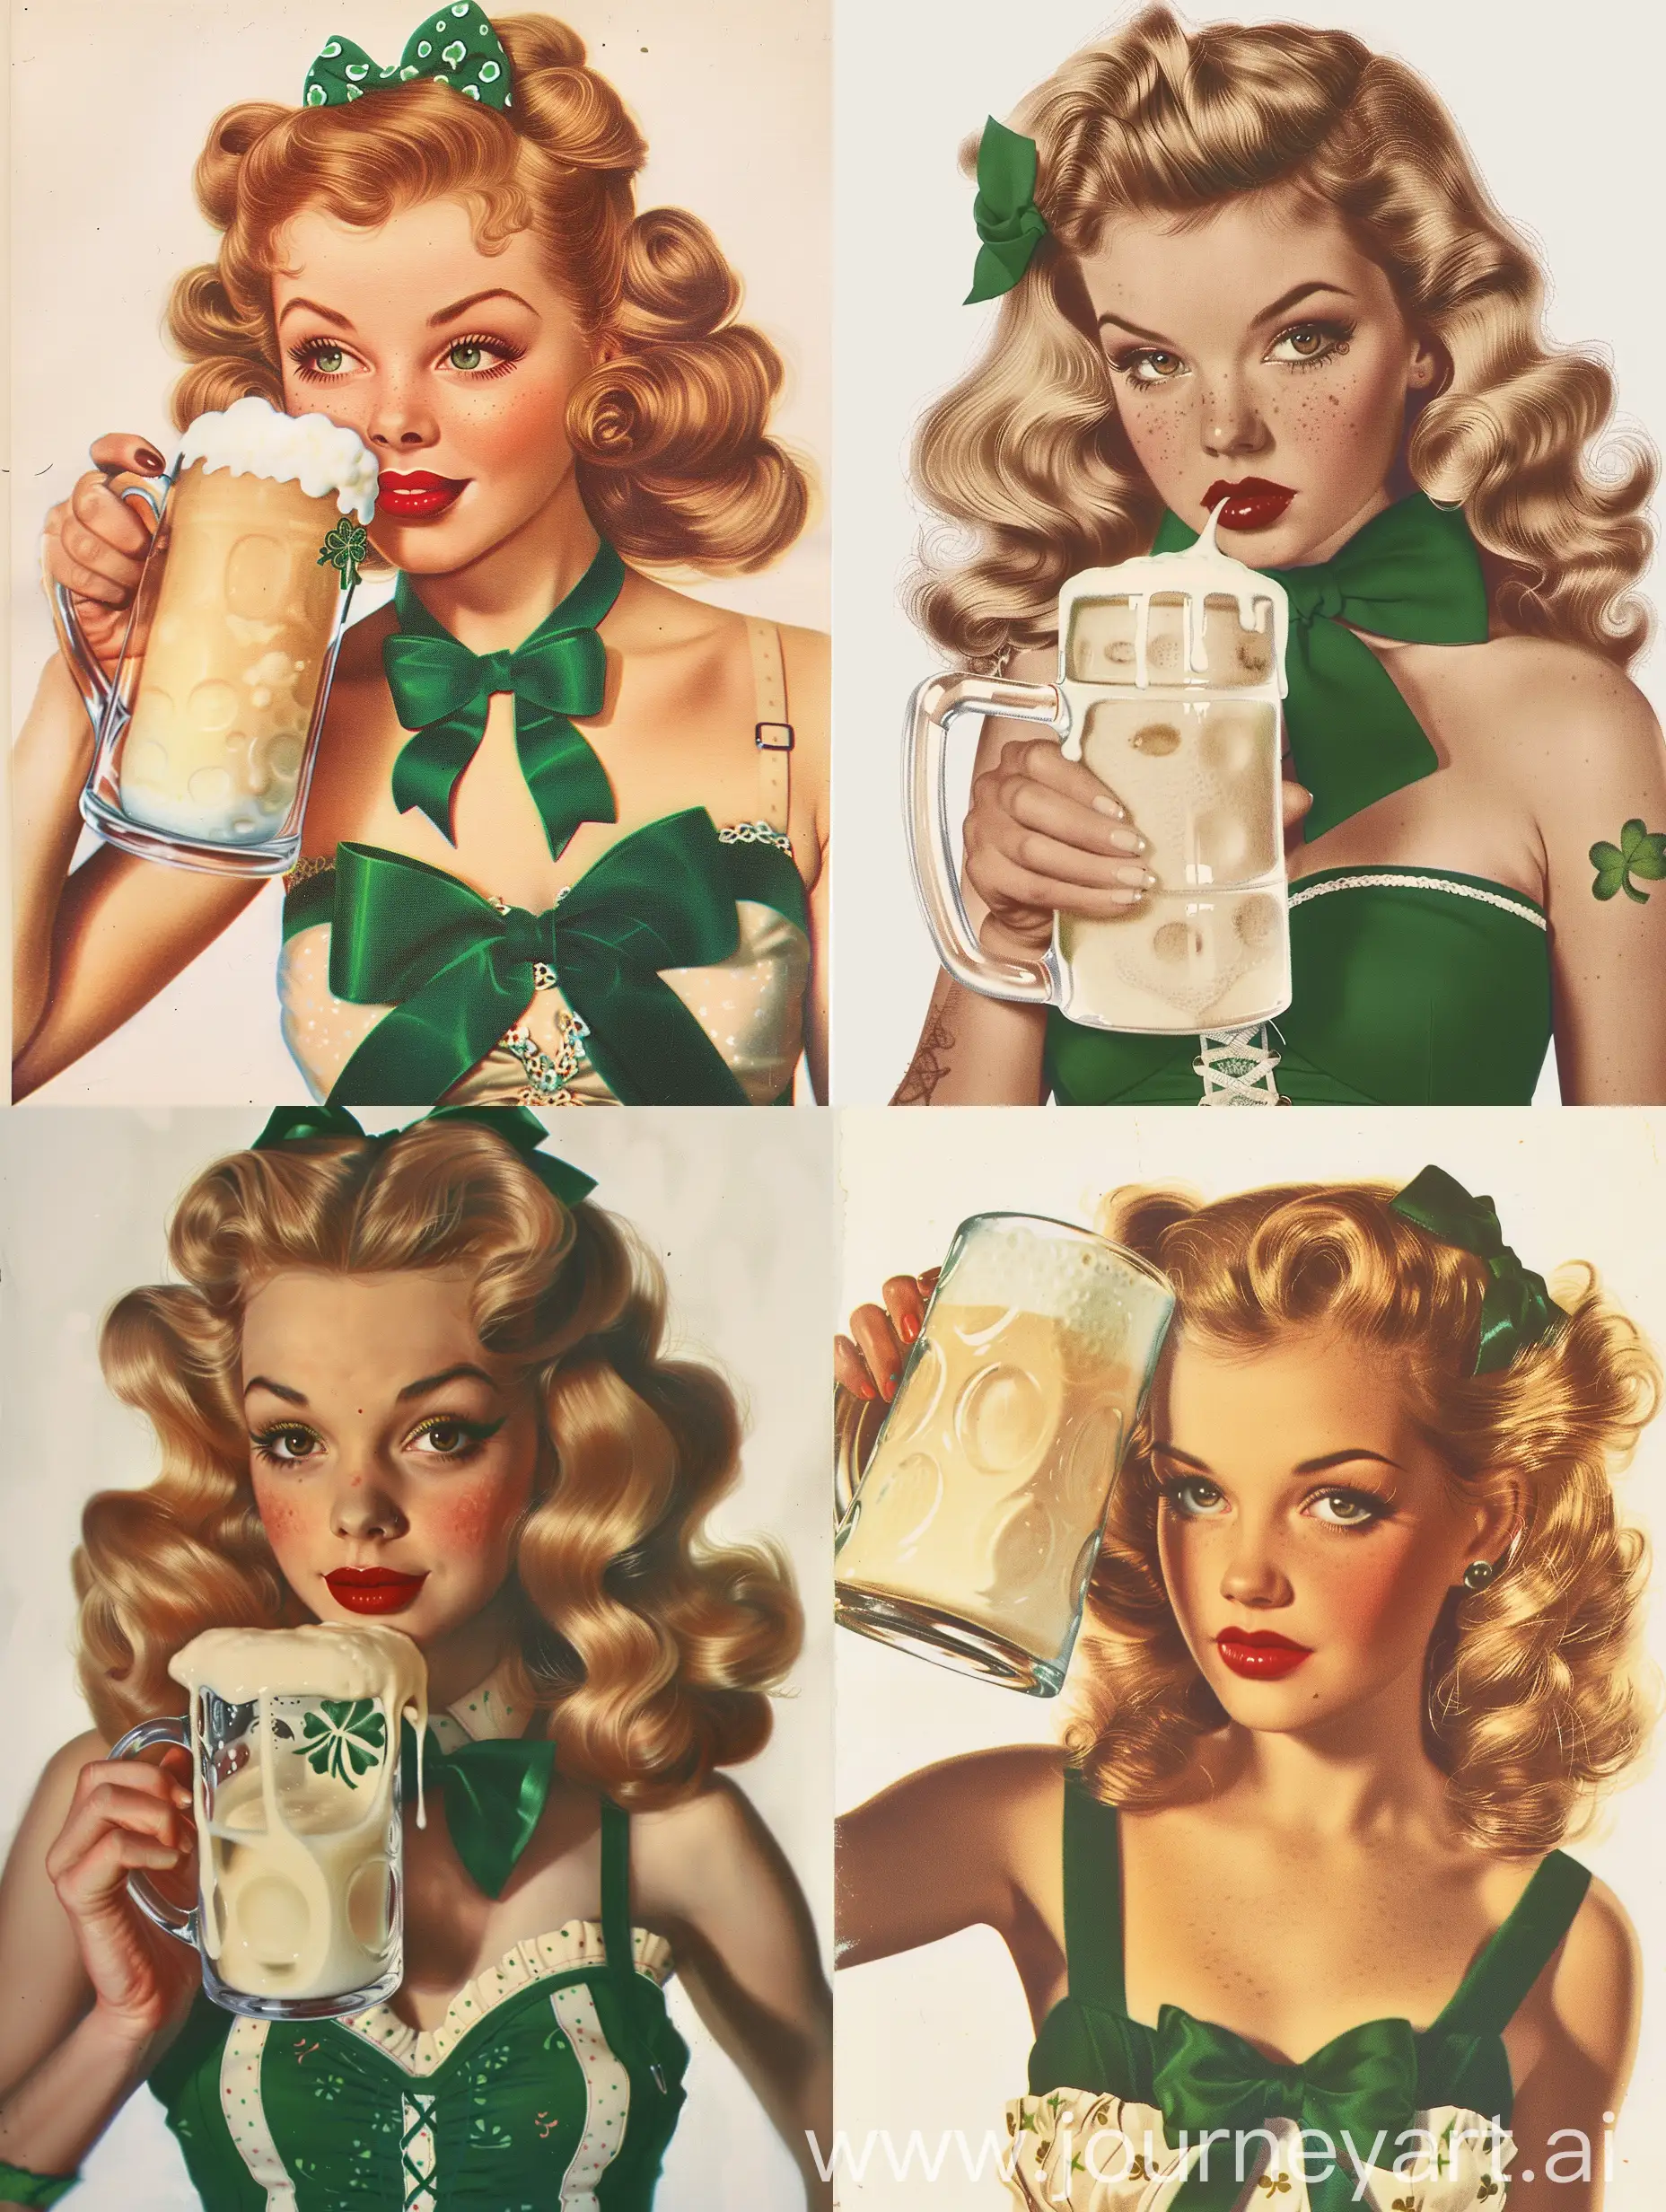 Classic-1950s-PinUp-Girl-with-Frothy-Beer-Mug-St-Patricks-Day-Vintage-Portrait